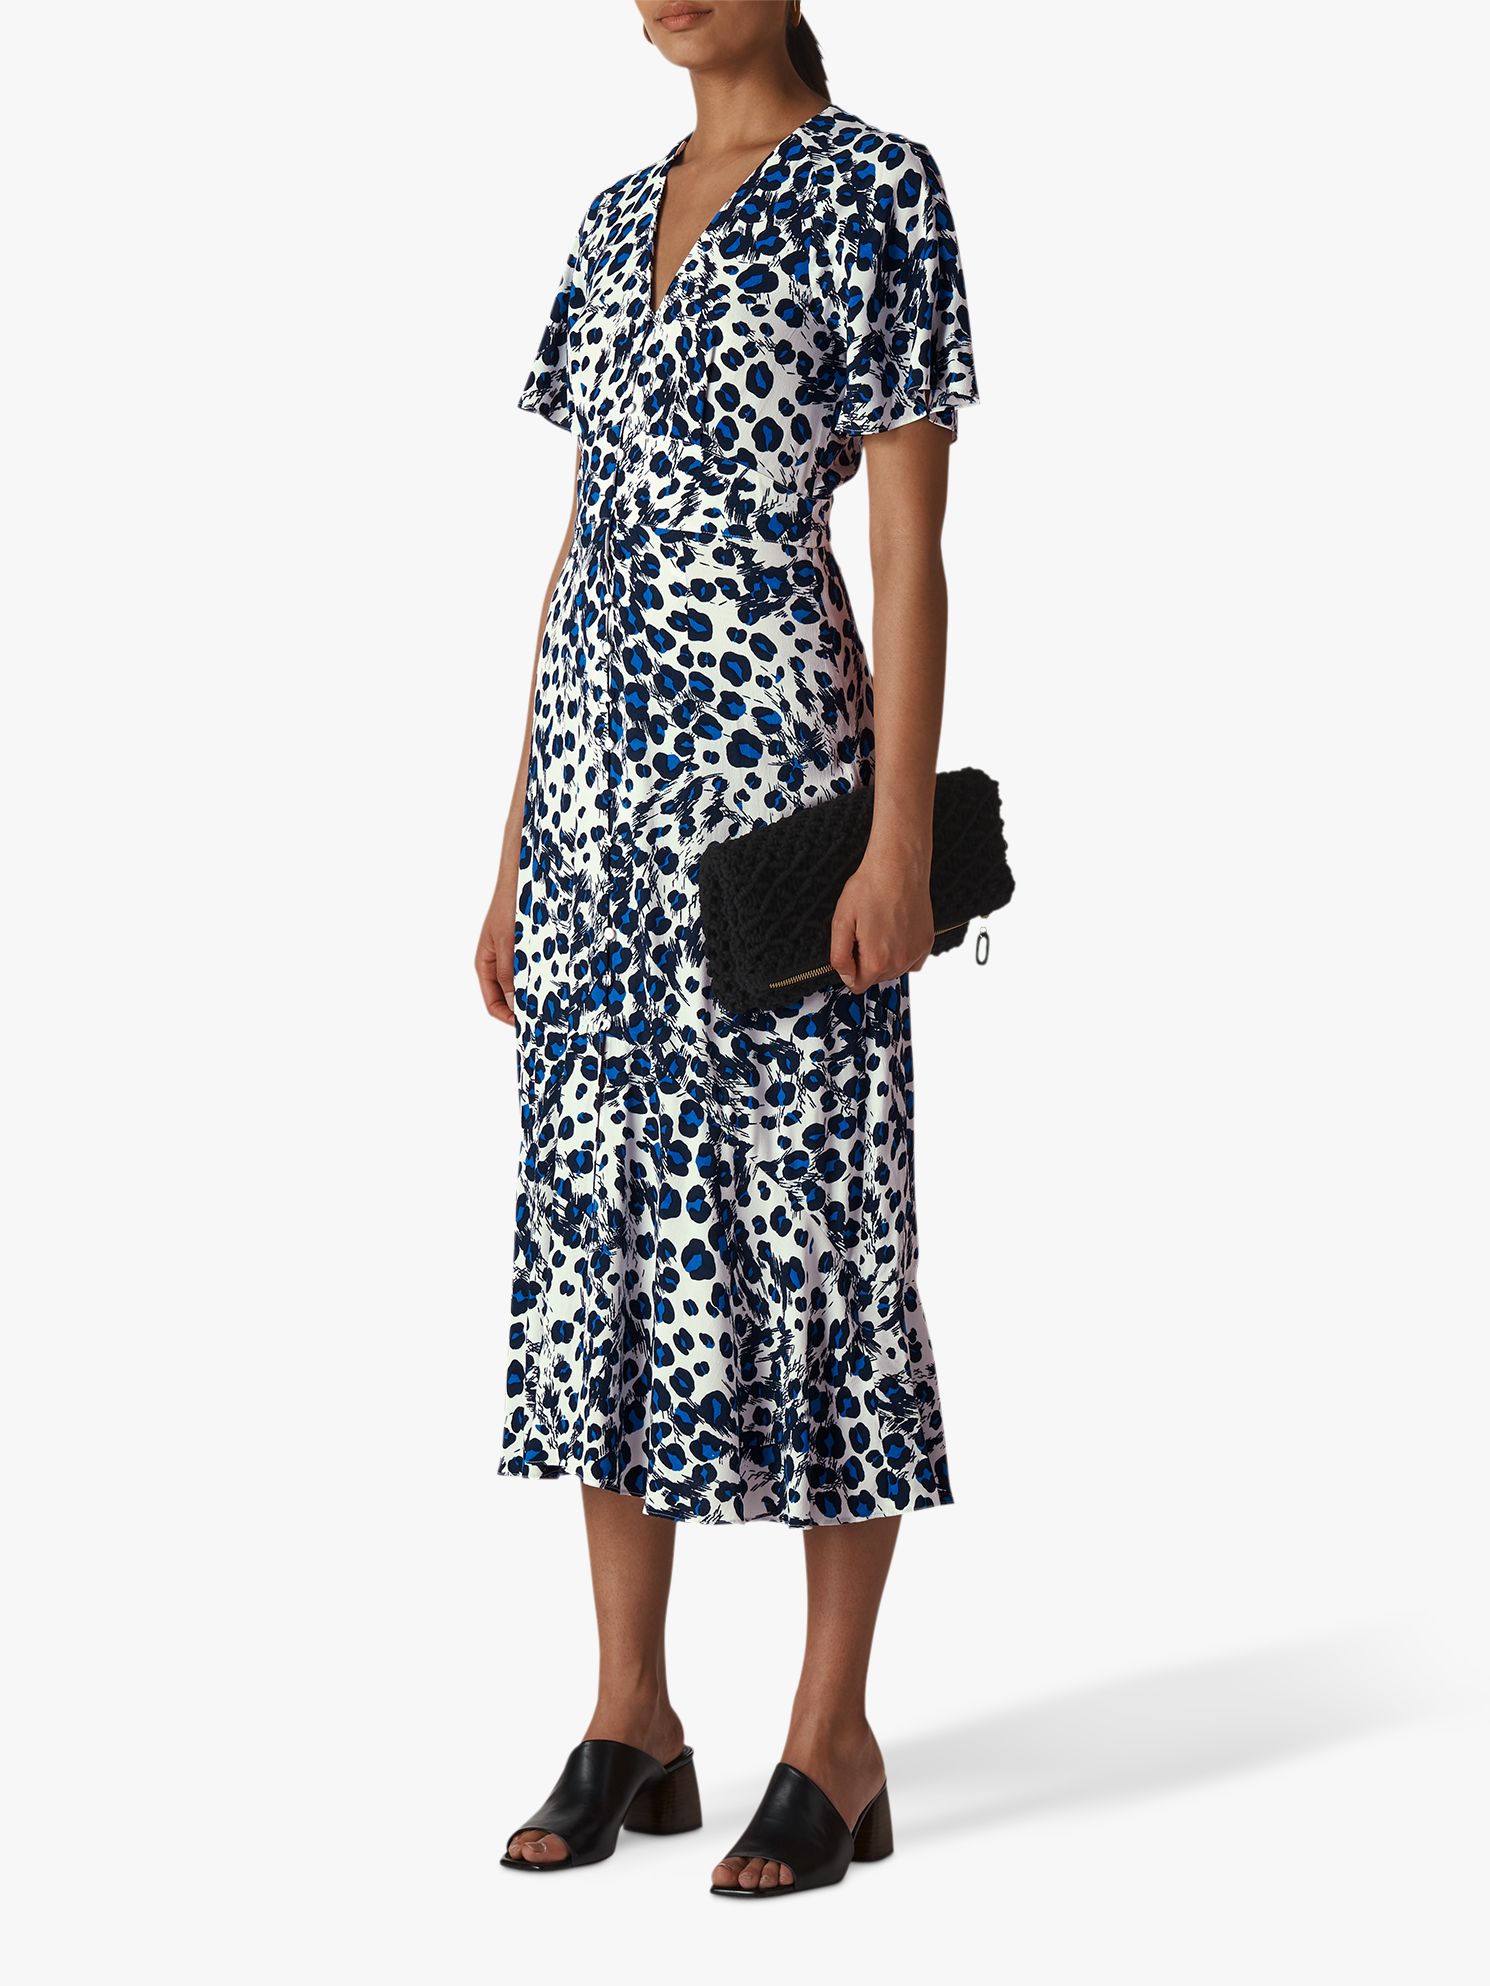 Whistles Brushed Leopard Button Dress, Blue/Multi at John Lewis & Partners